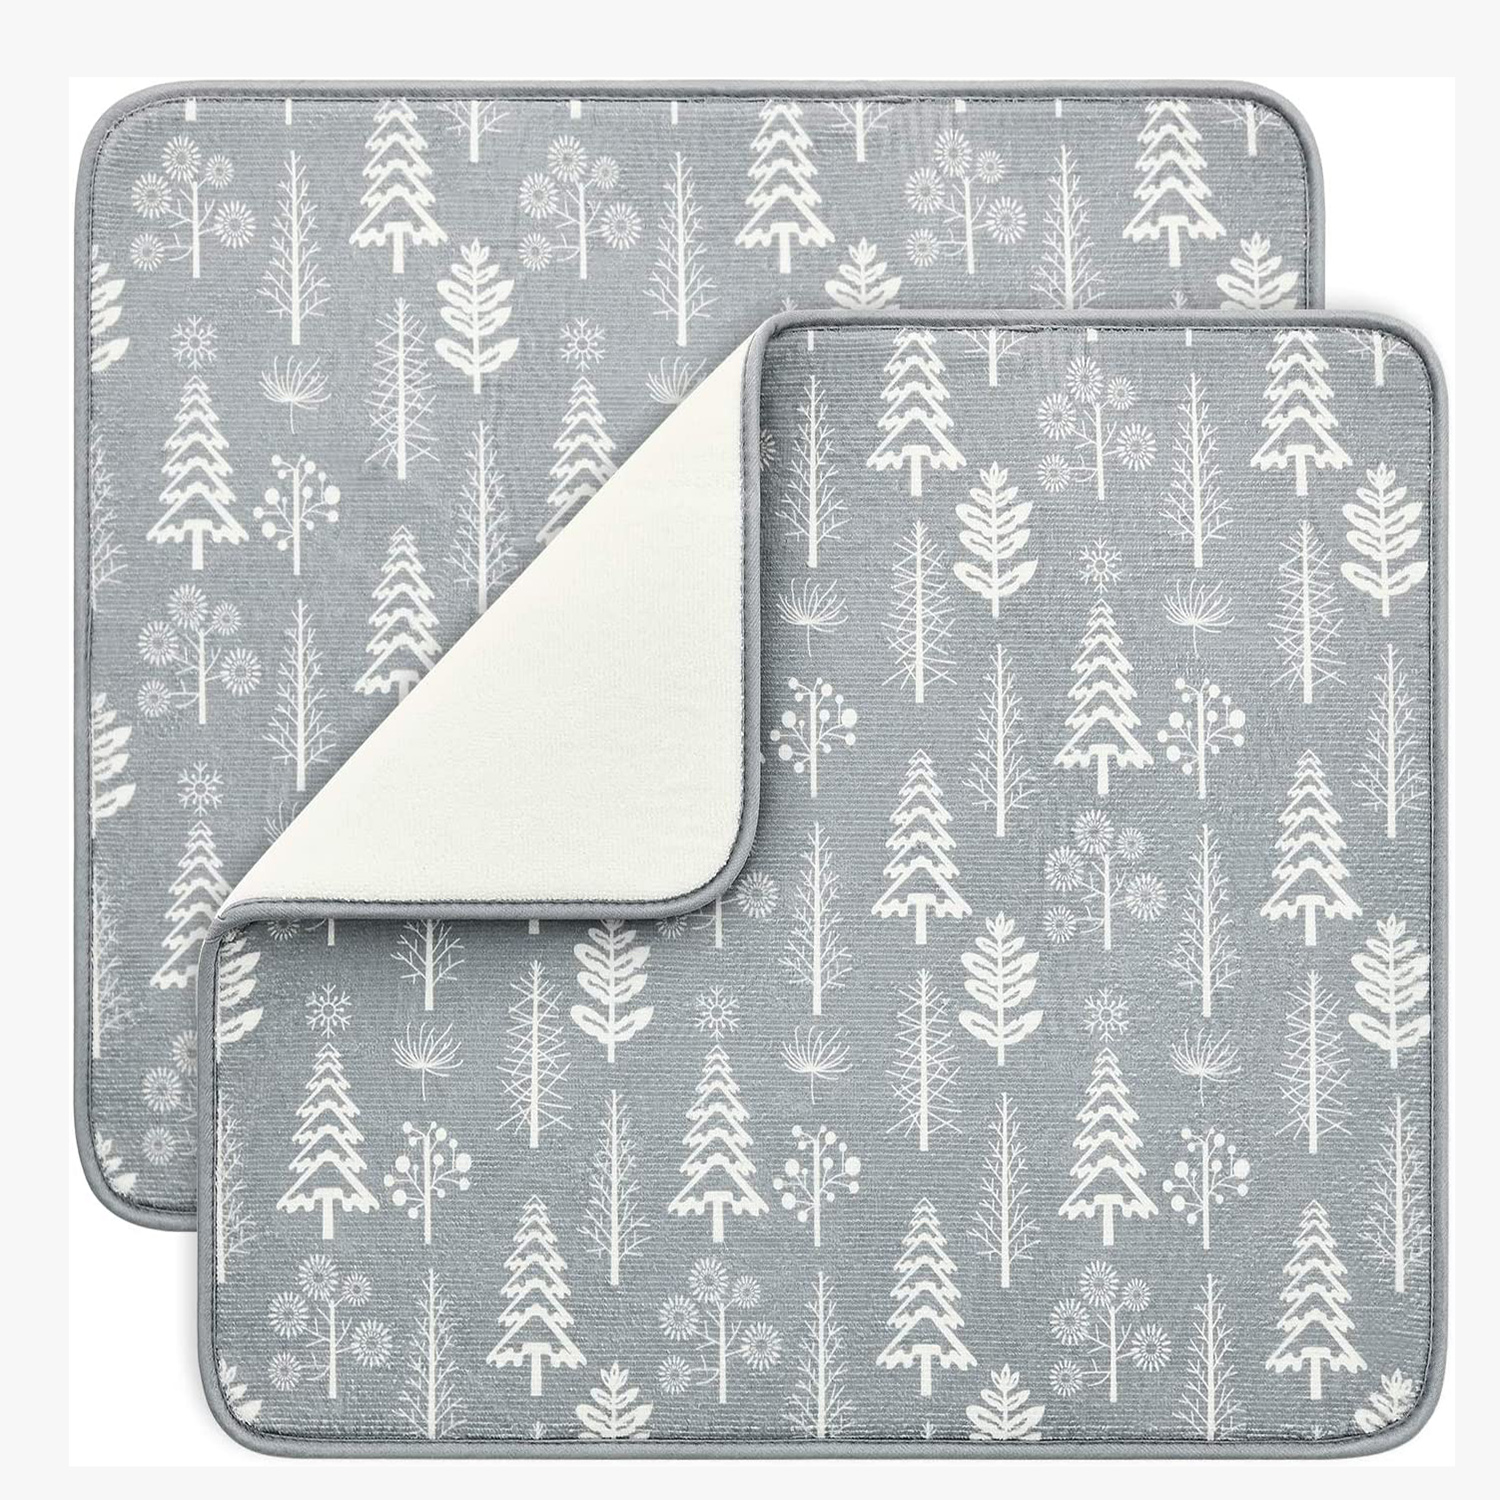 Dish Drying Mats for Kitchen Counter , Microfiber Absorbent Dish Drainer/Rack Pads for Sink, 19.515.8 inch, Tree, Grey